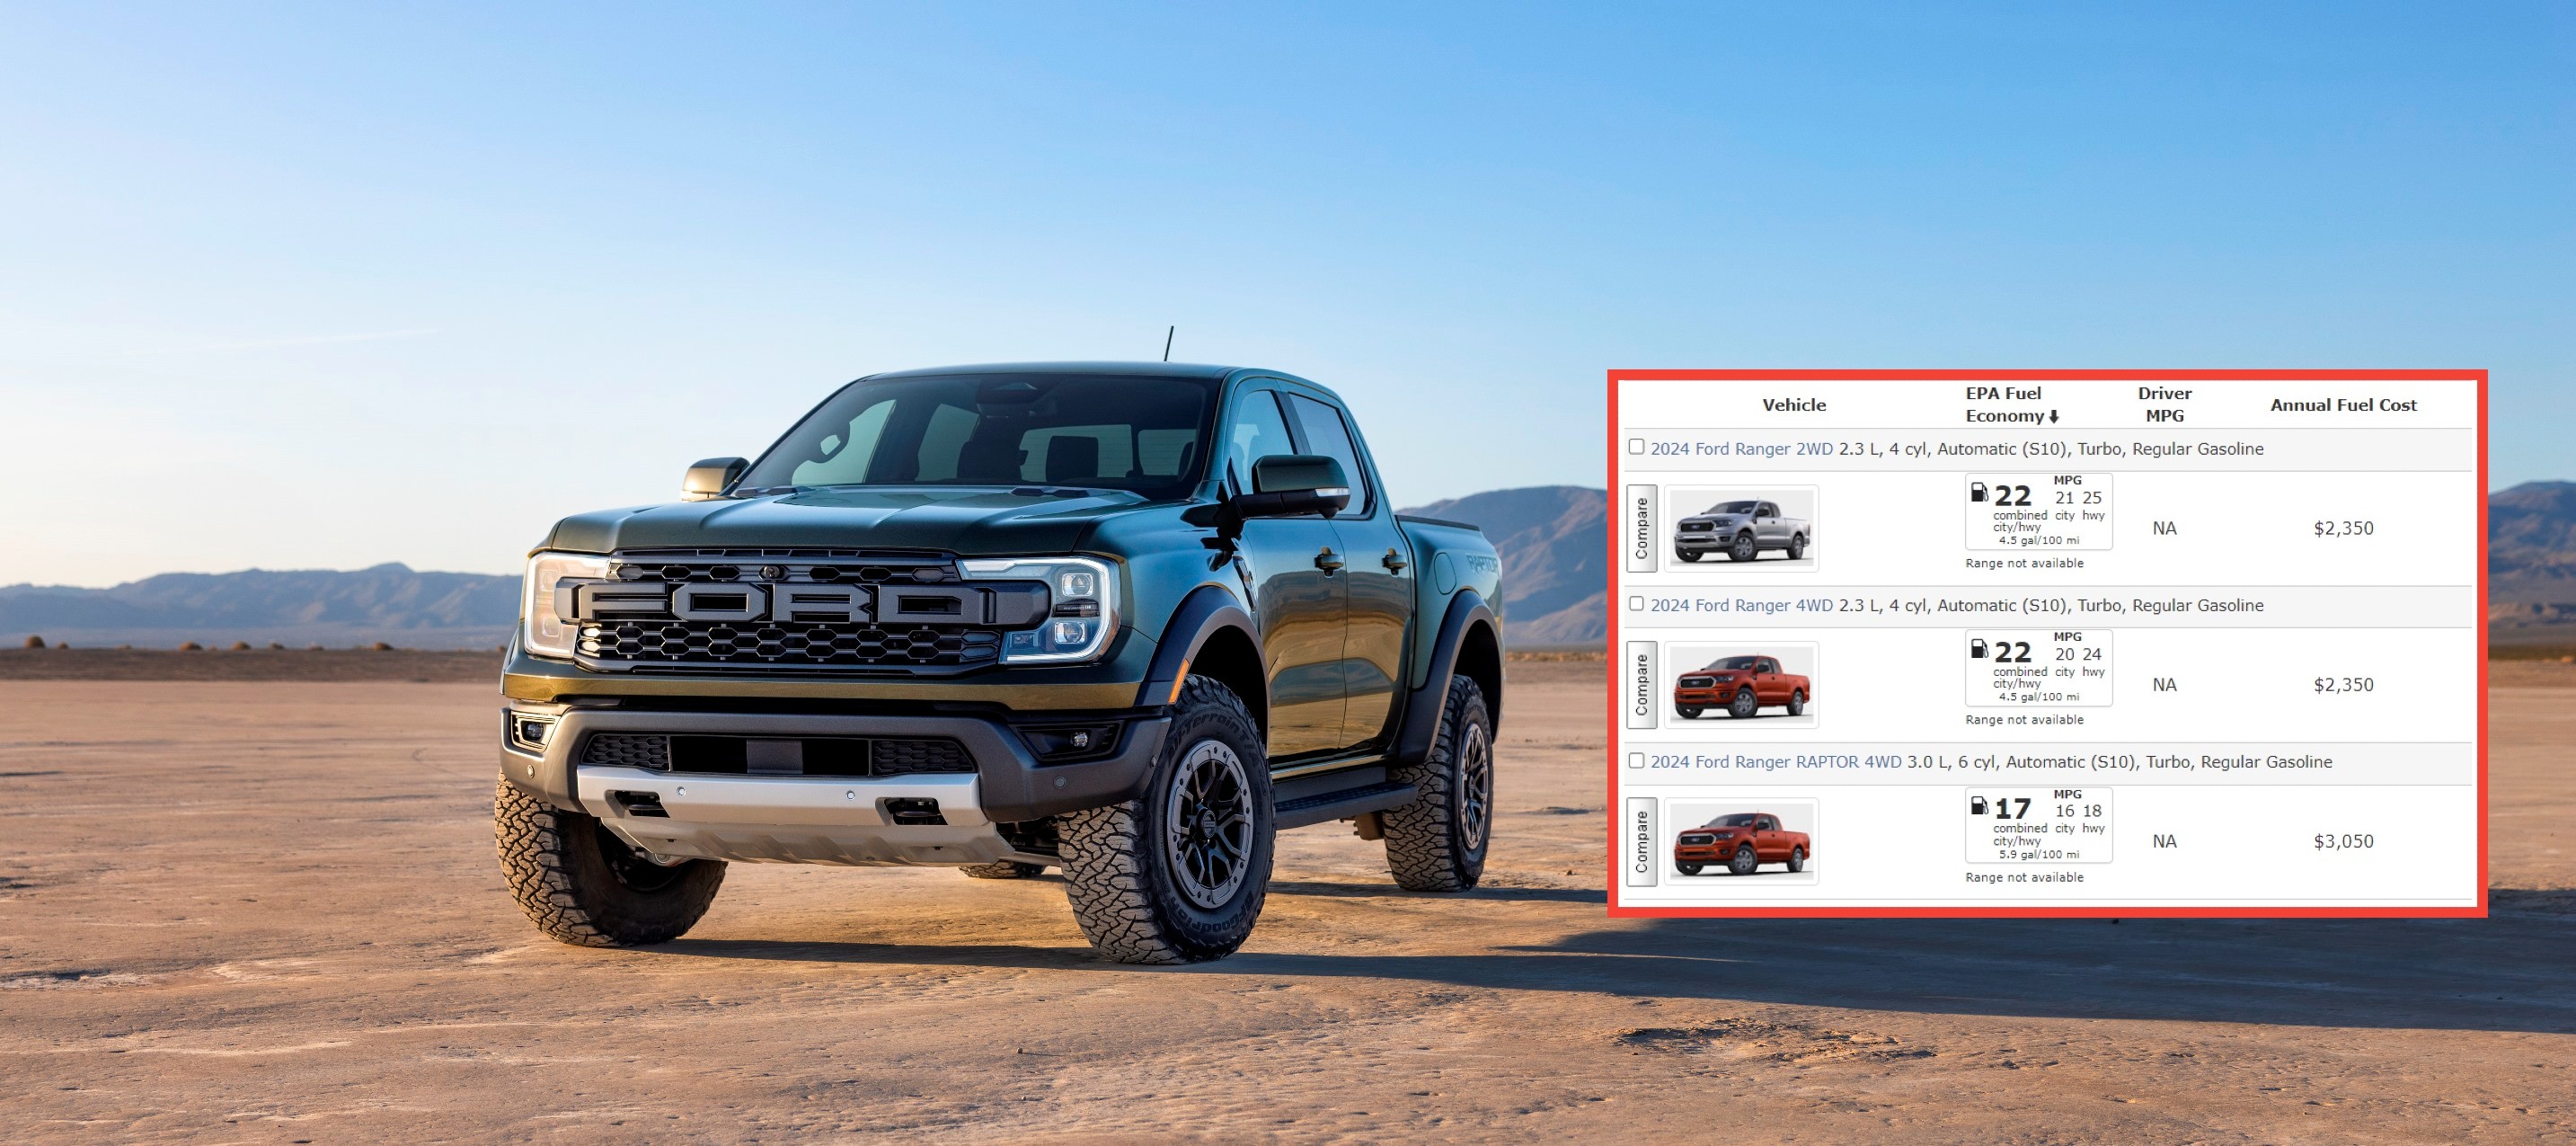 EPA Publishes 2024 Ford Ranger Fuel Economy Ratings, Raptor Offers 17